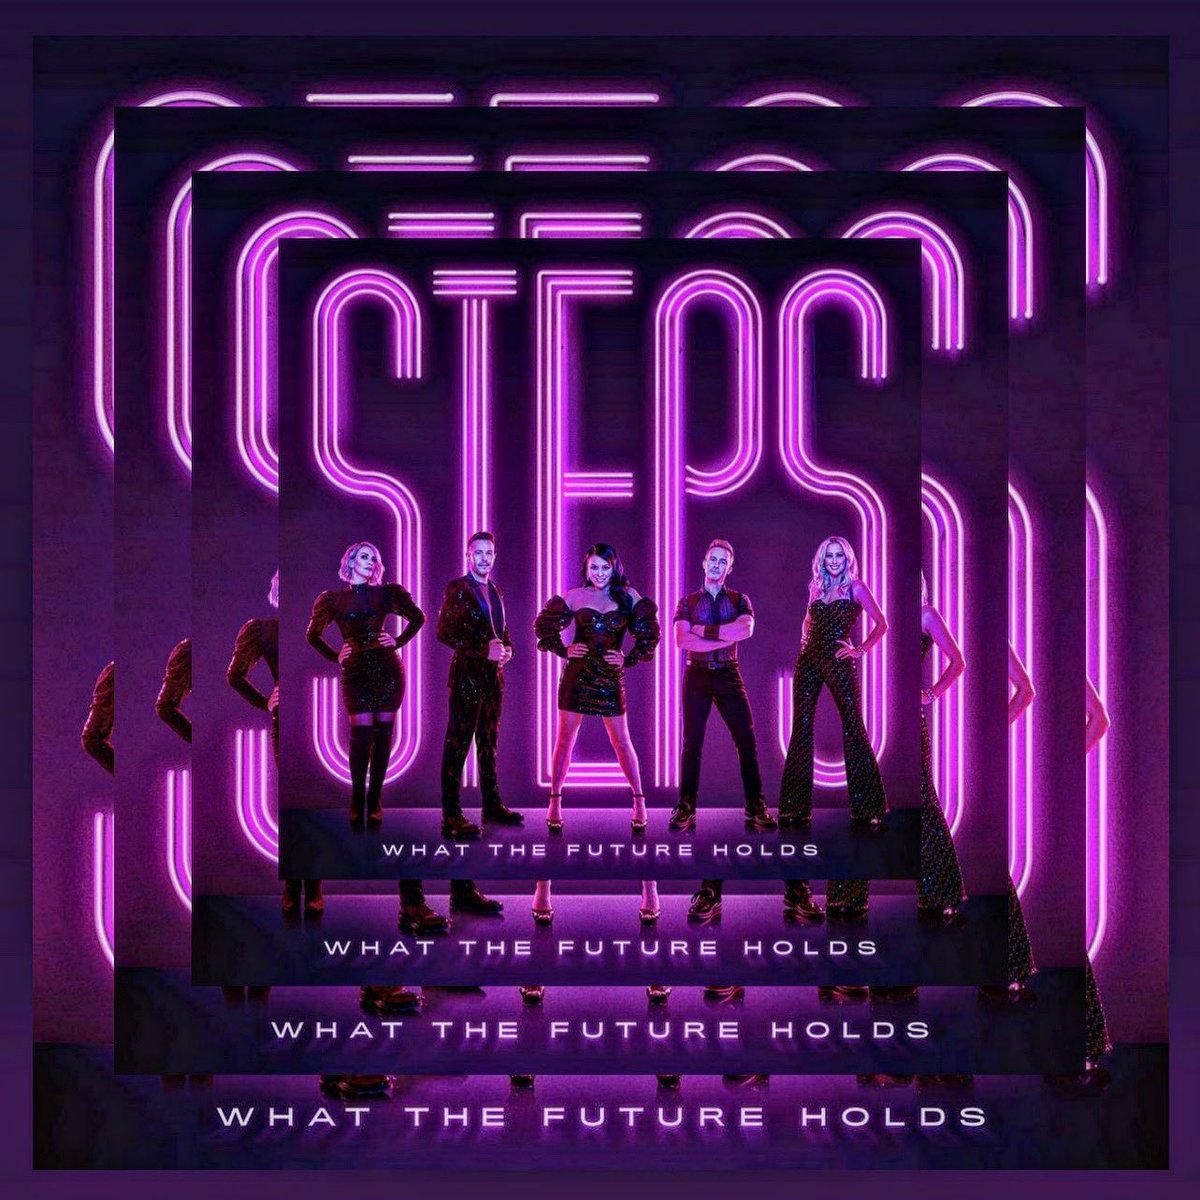 Celebrating 1 year of What The Future Holds. What an era it’s been for @OfficialSteps 🤩 #wtfh #album #1yearold @LSLofficial @llatchfordevans @Ianhwatkins @Faye_Tozer @_ClaireRichards #greatalbum #popmusic #moretocome